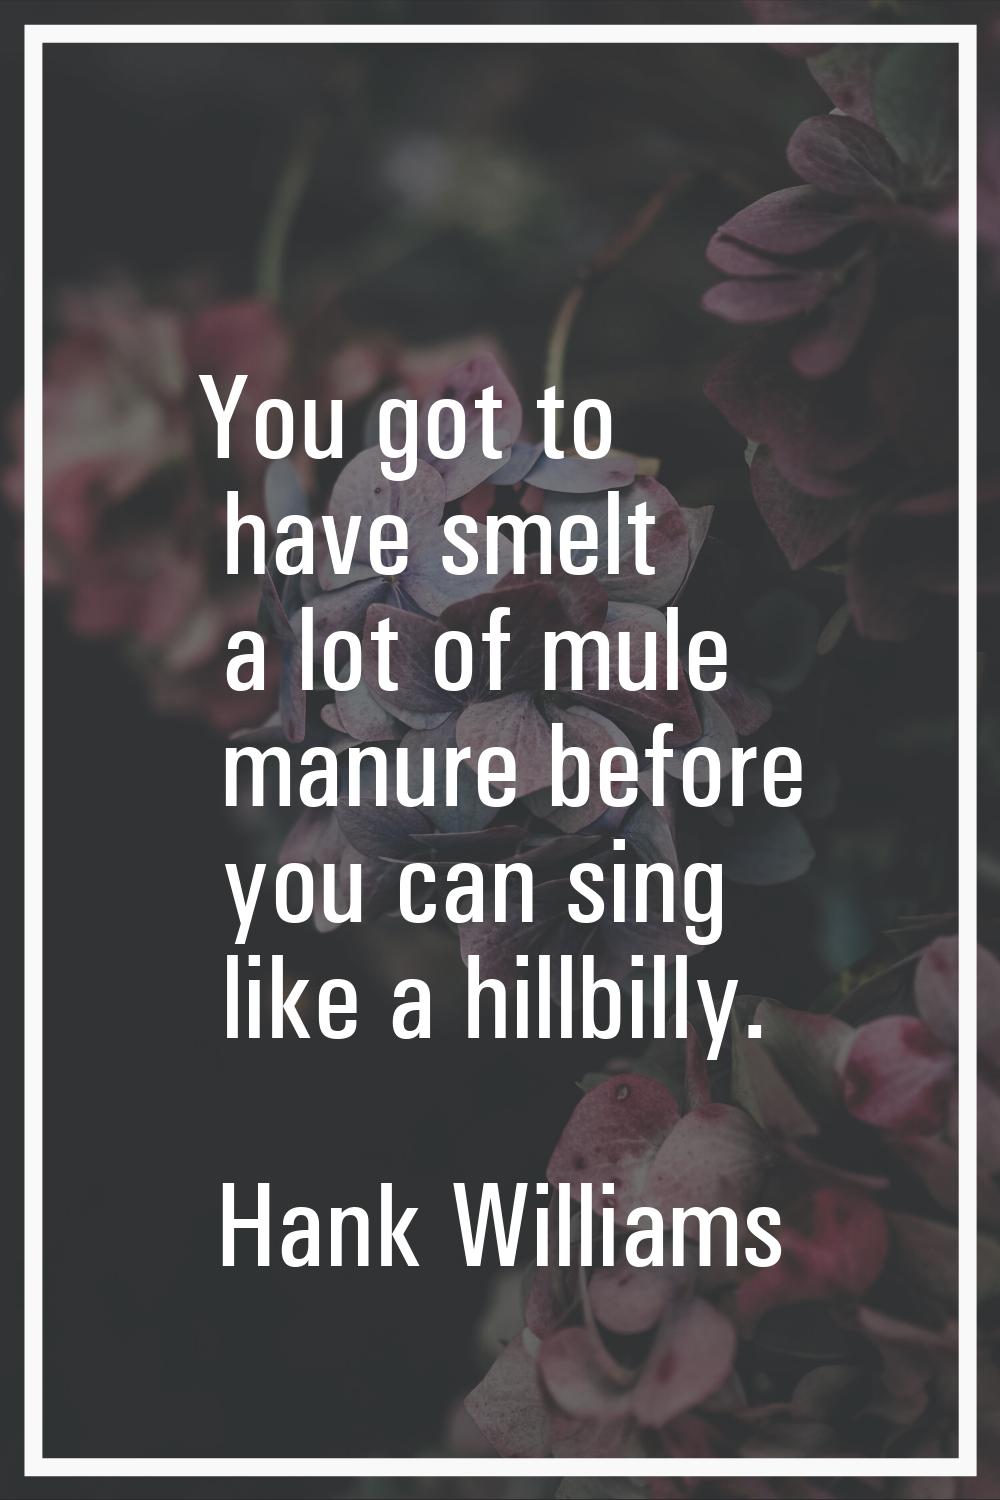 You got to have smelt a lot of mule manure before you can sing like a hillbilly.